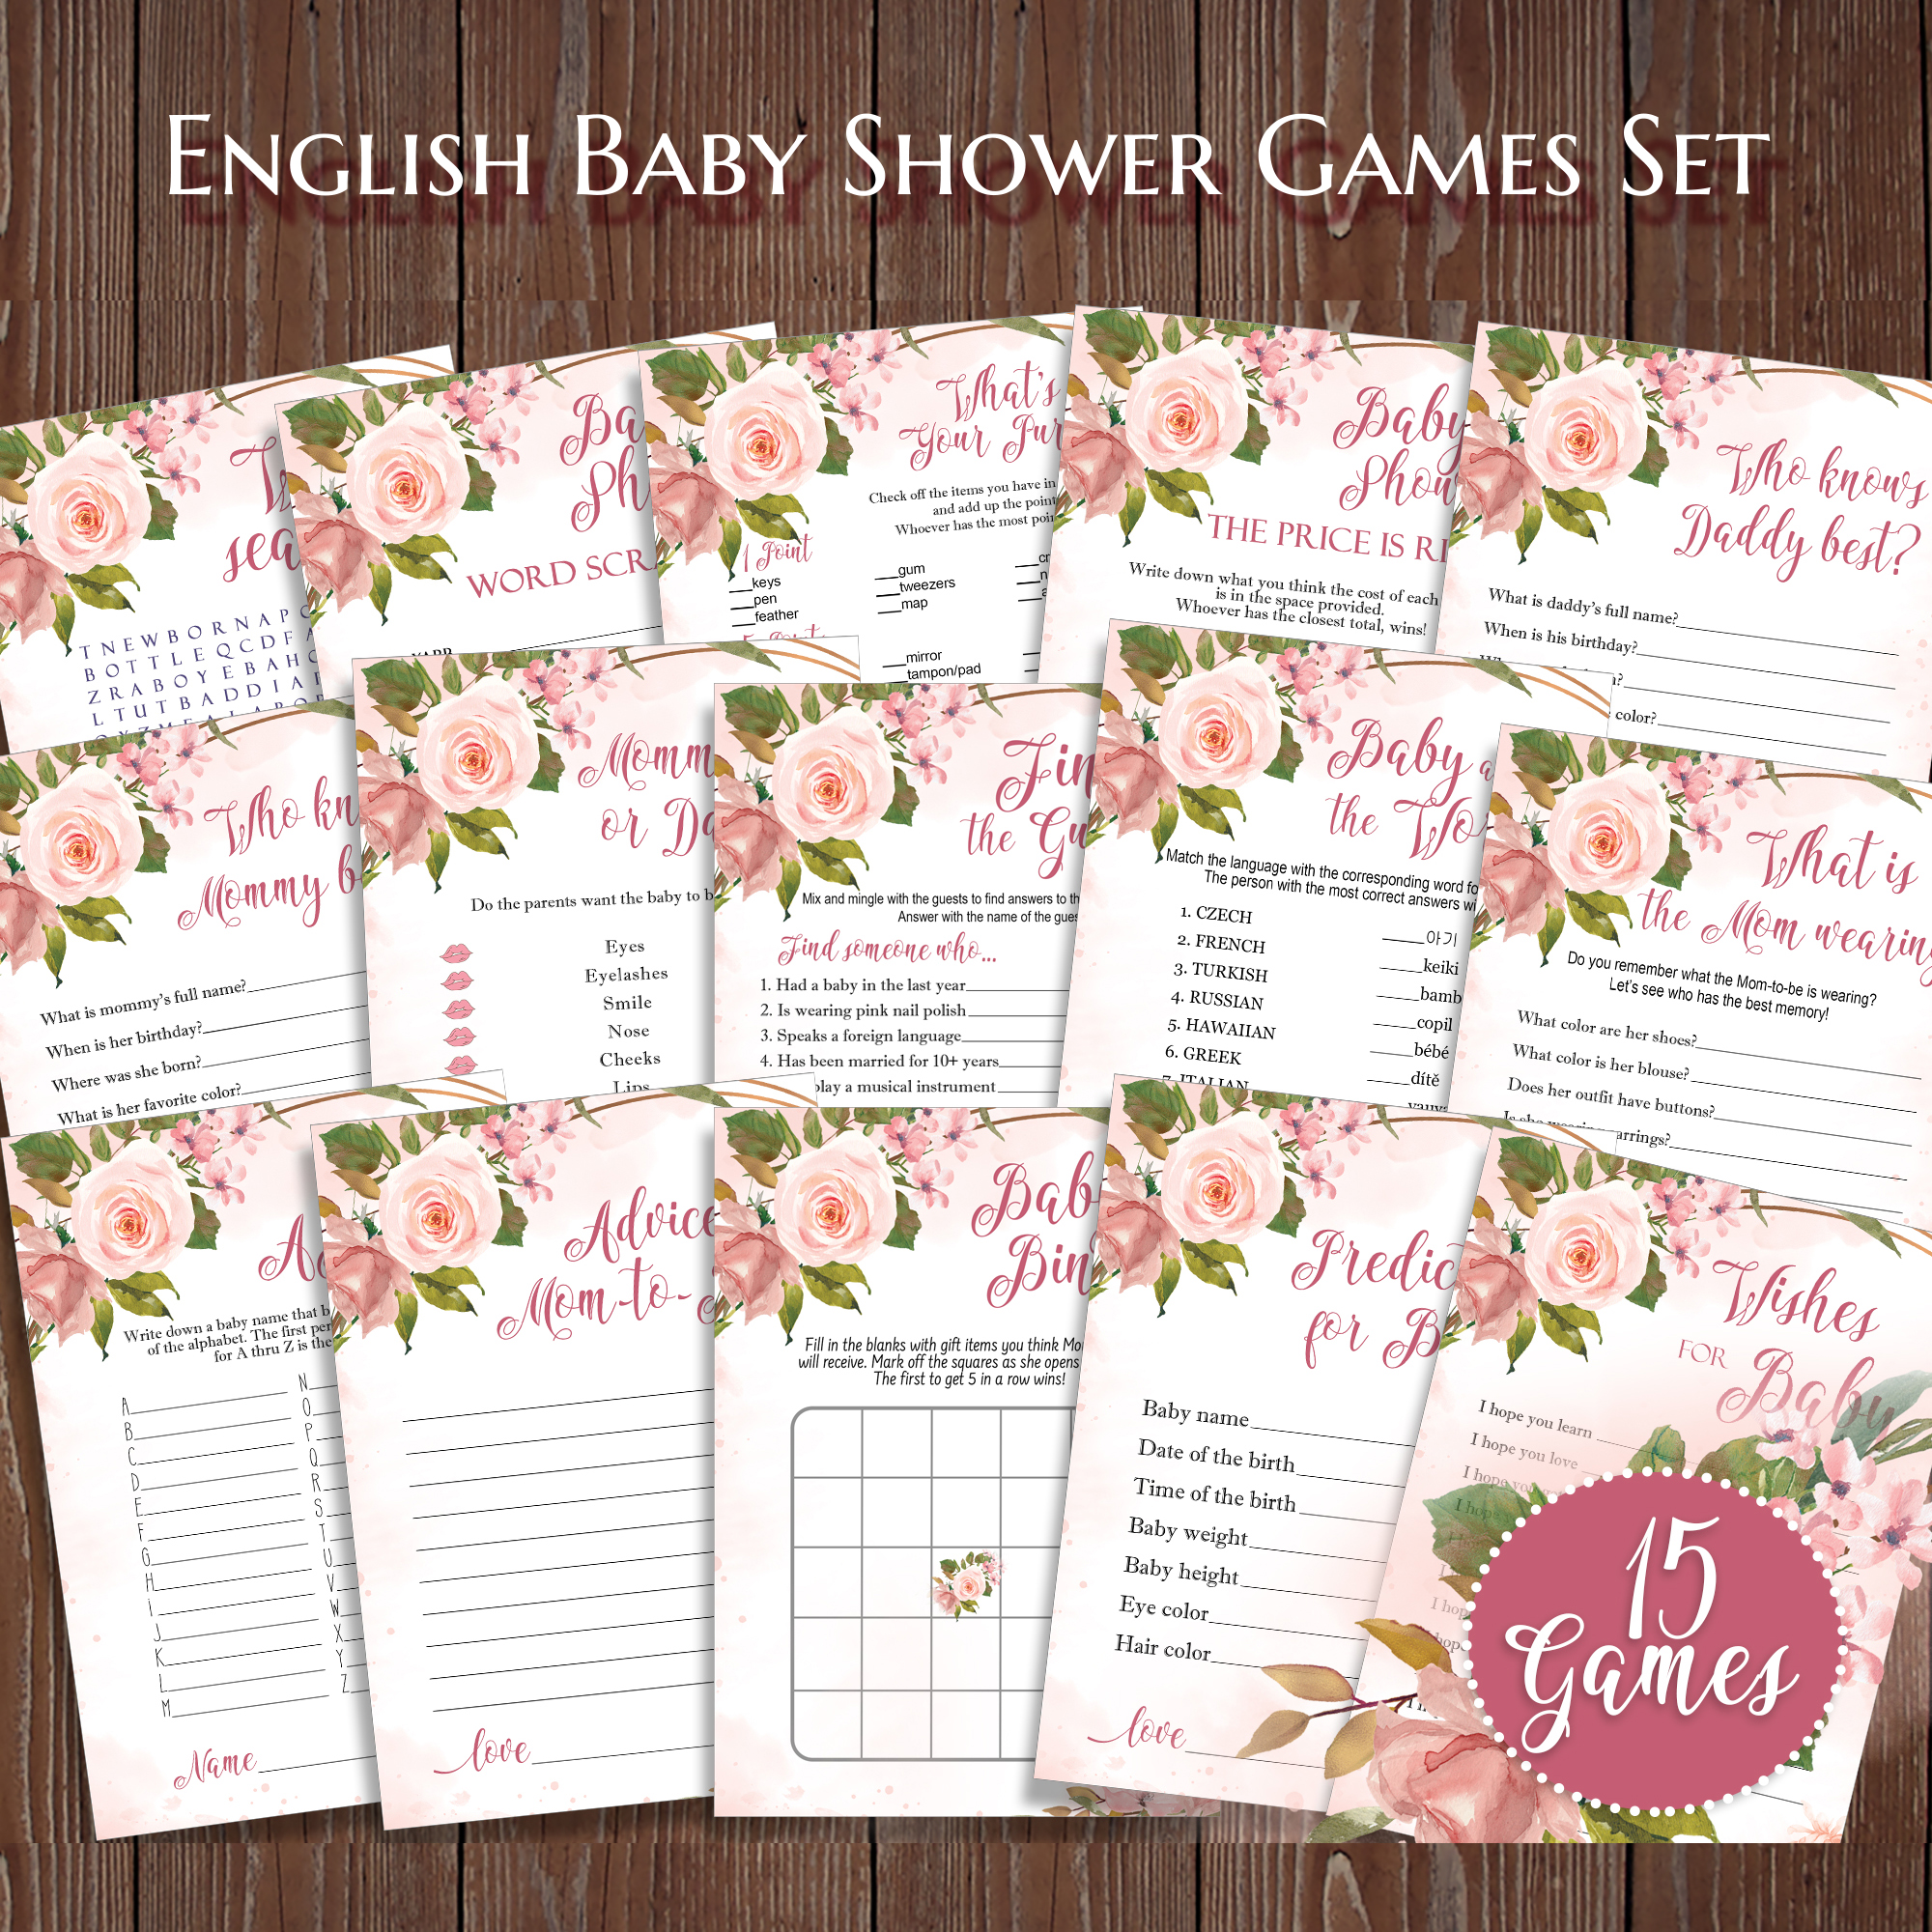 Printable Baby Shower Game Winnie the Pooh Baby ABC - INSTANT